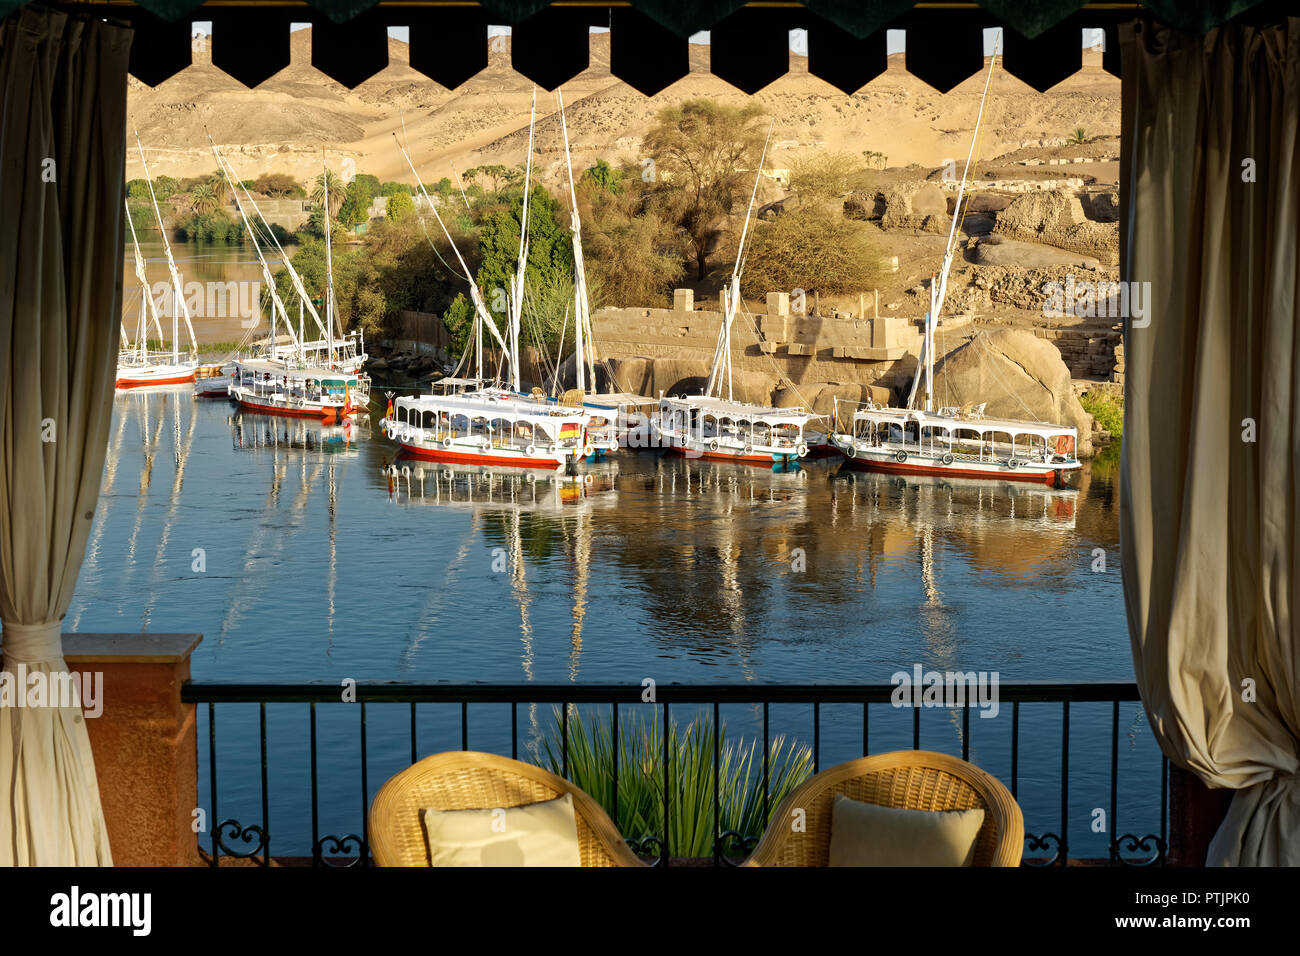 Looking out over the River Nile at Elephantine Island from the historic Old Cataract Hotel in Aswan Stock Photo